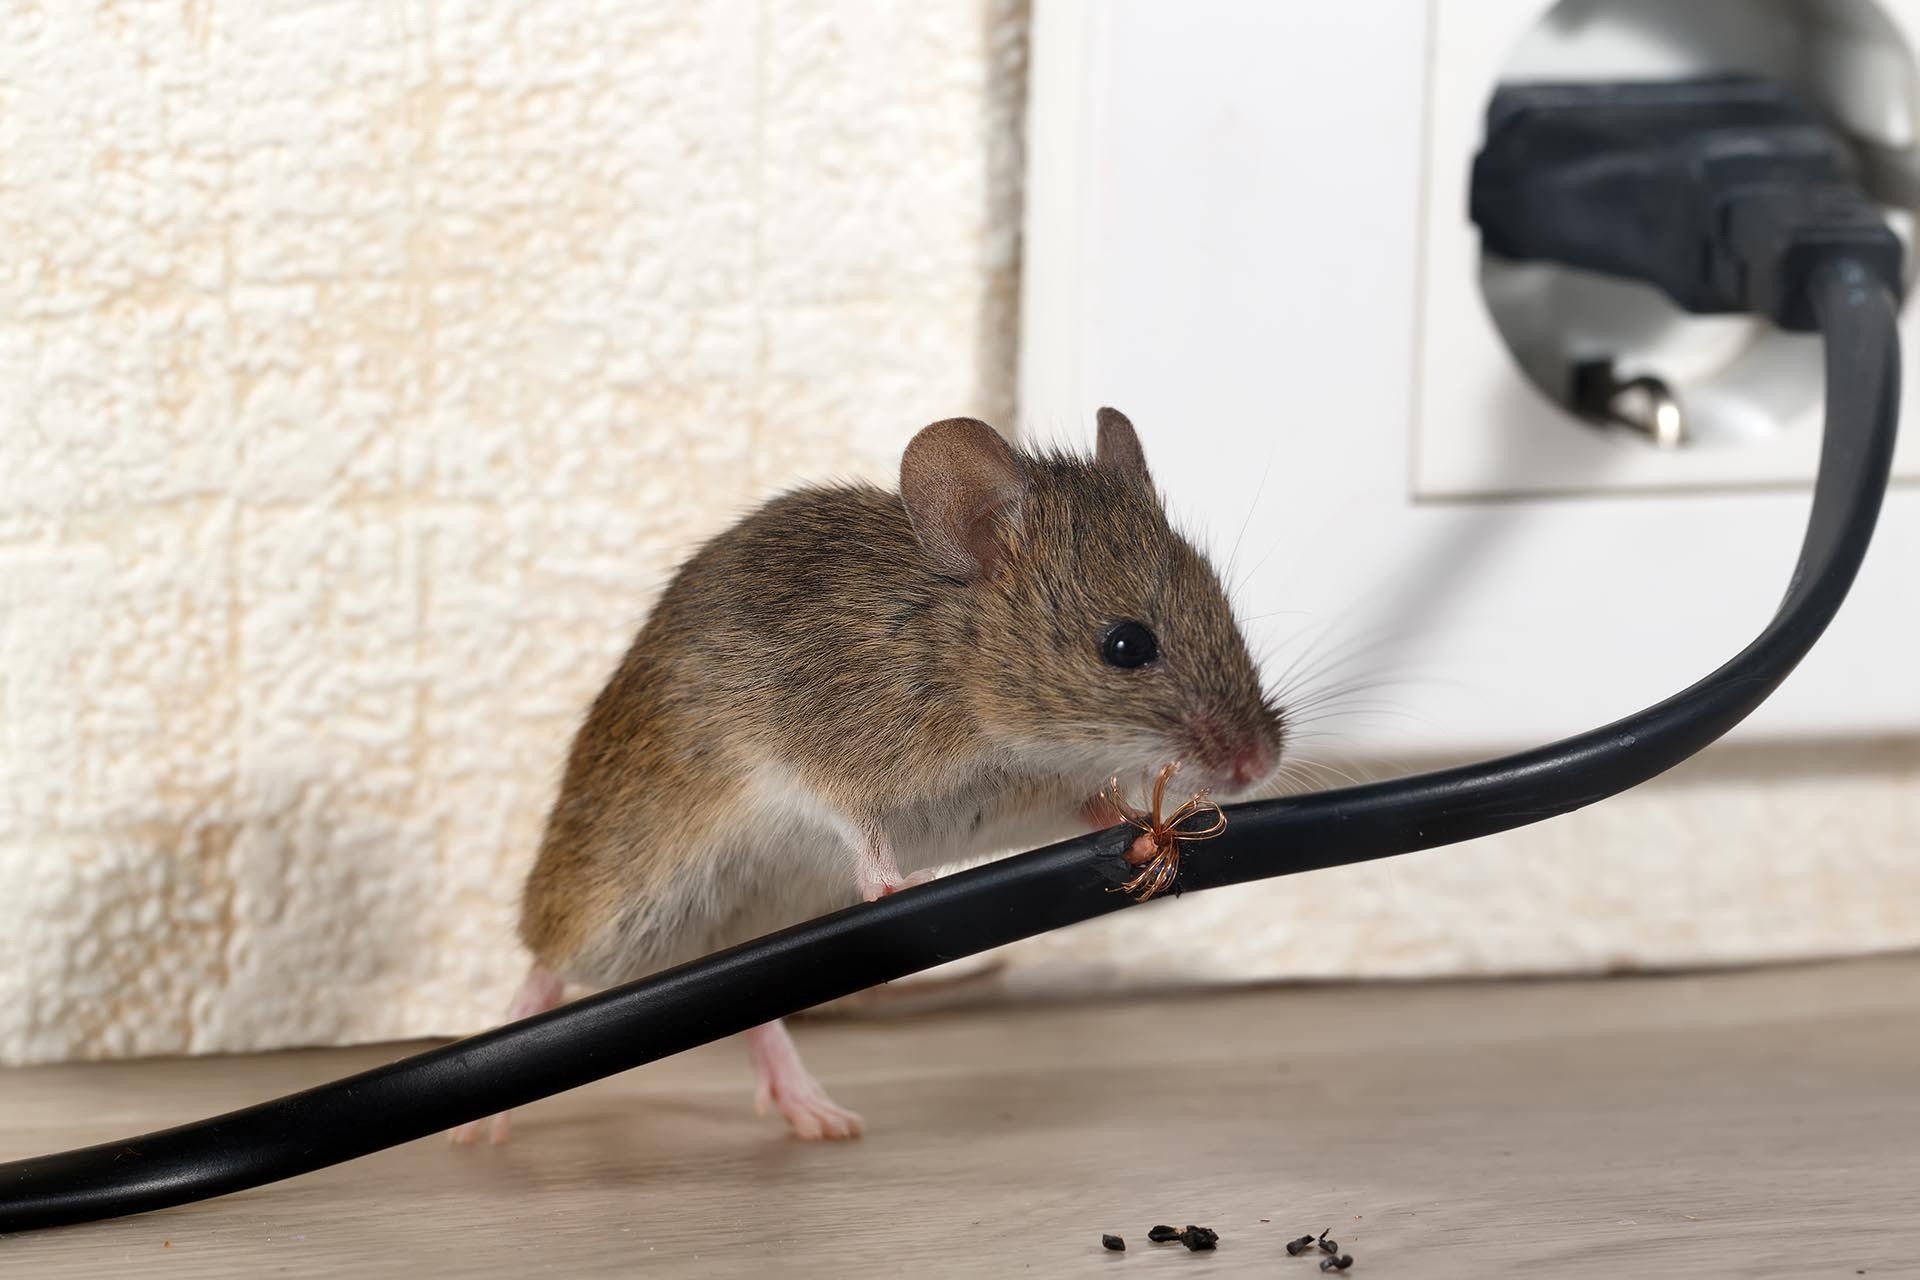 Rodents in plug